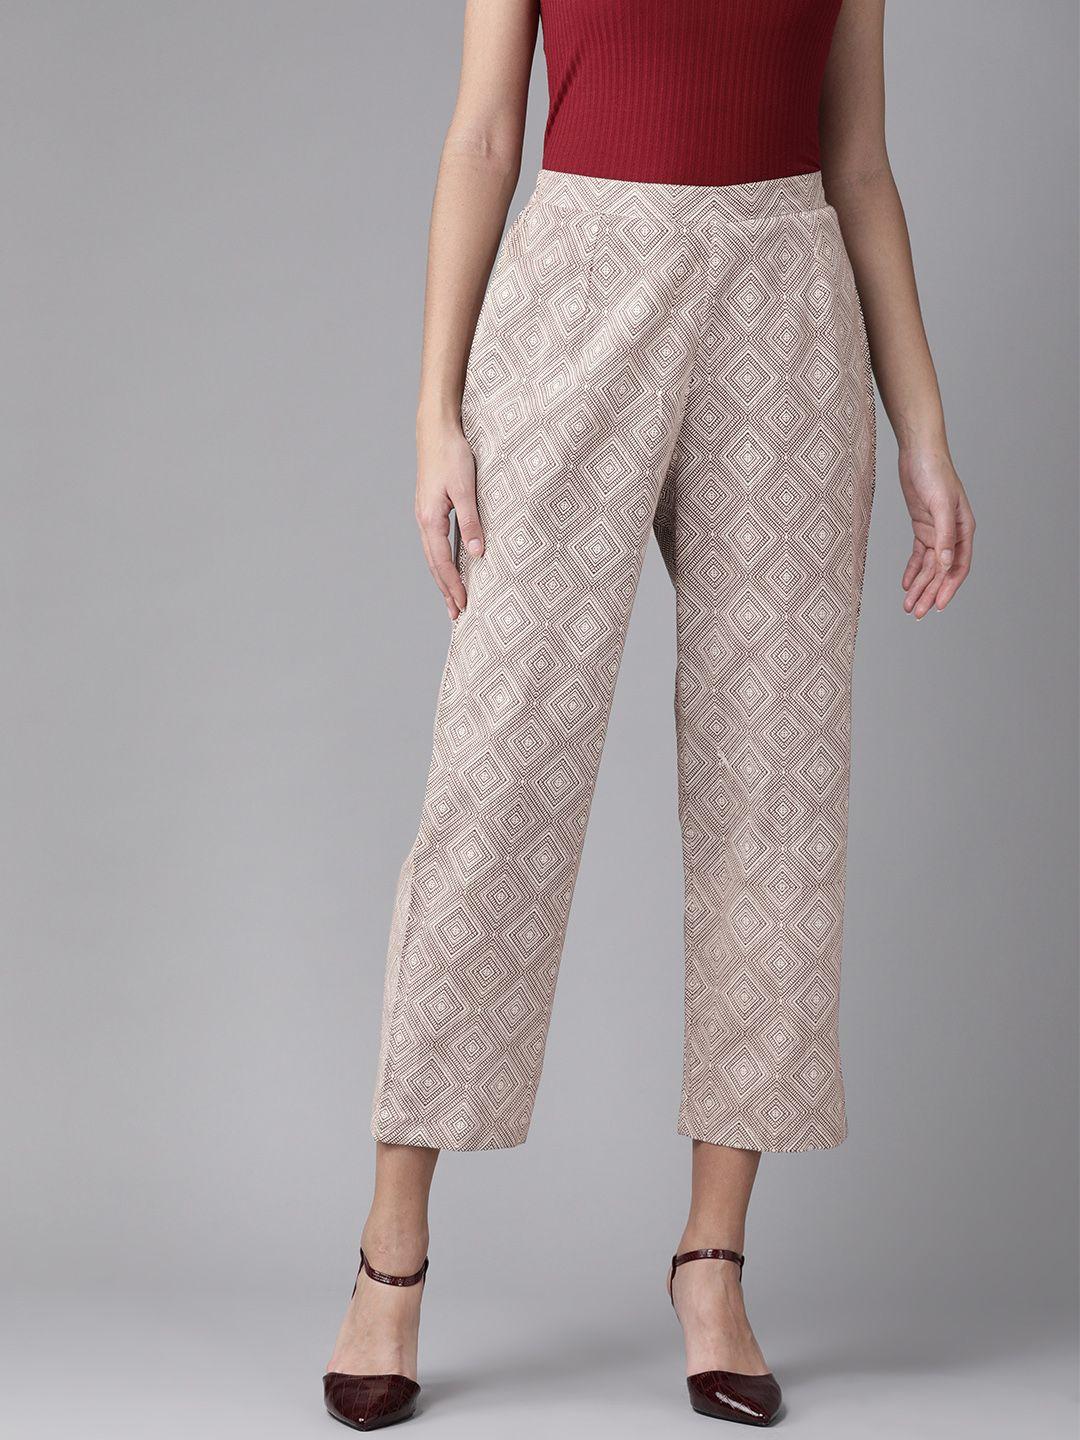 anayna women off-white & brown printed cropped trousers